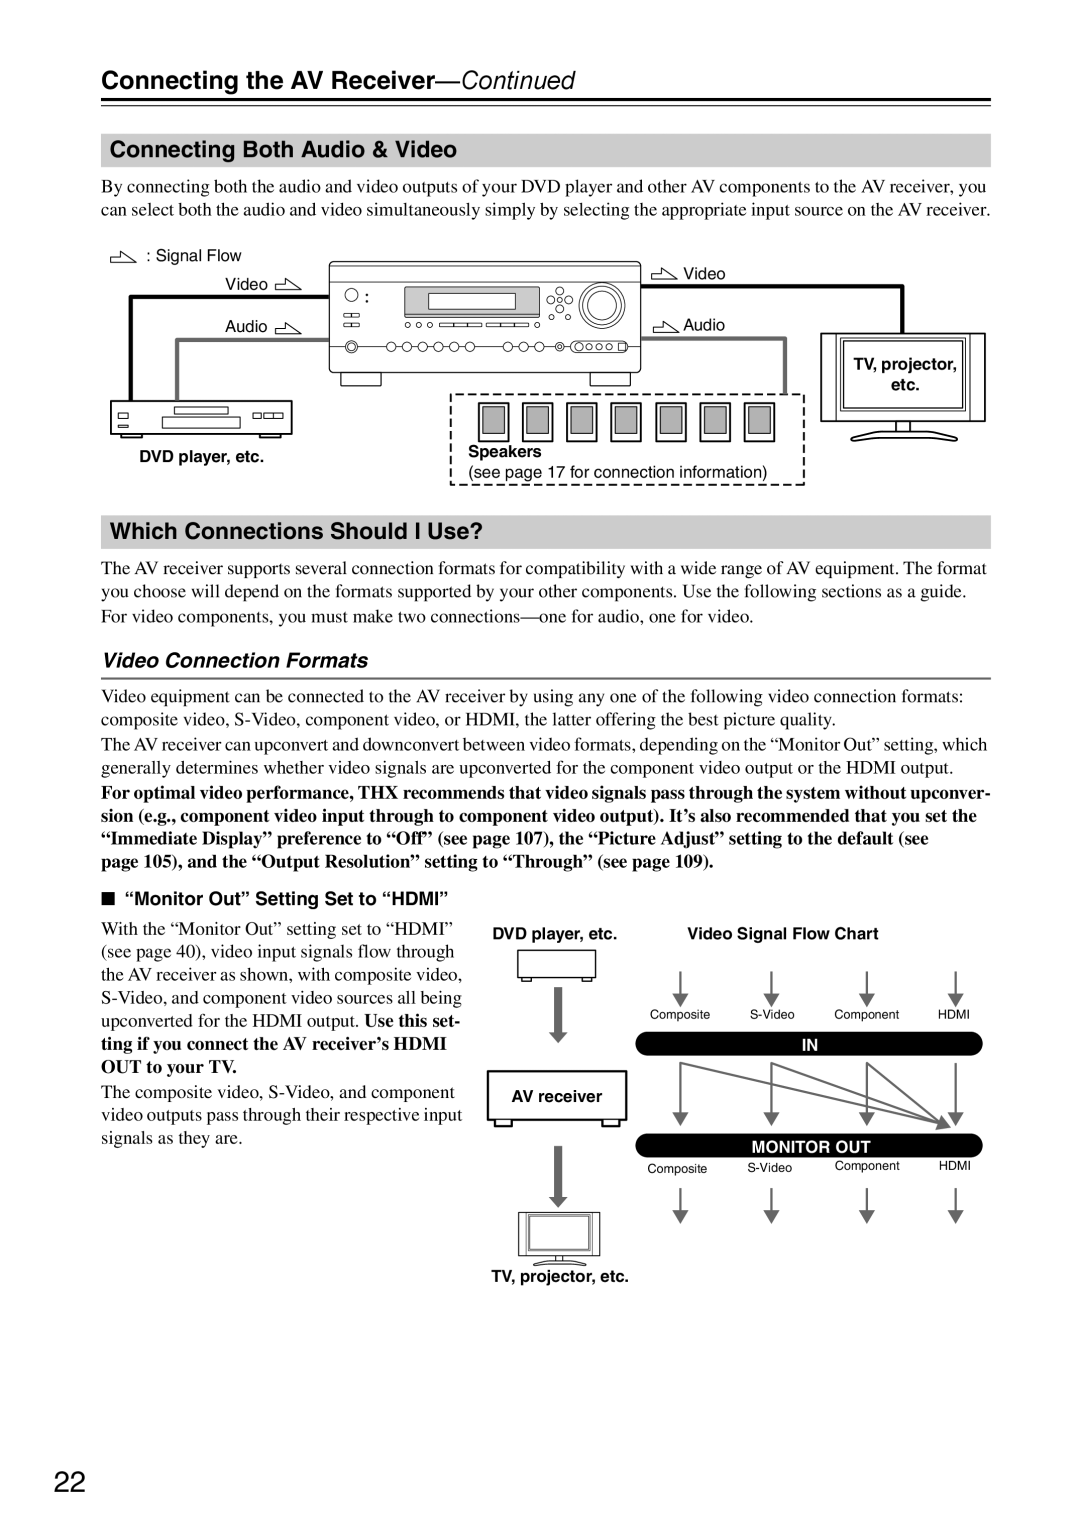 Onkyo DTR-7.9 instruction manual Connecting Both Audio & Video, Which Connections Should I Use?, Video Connection Formats 